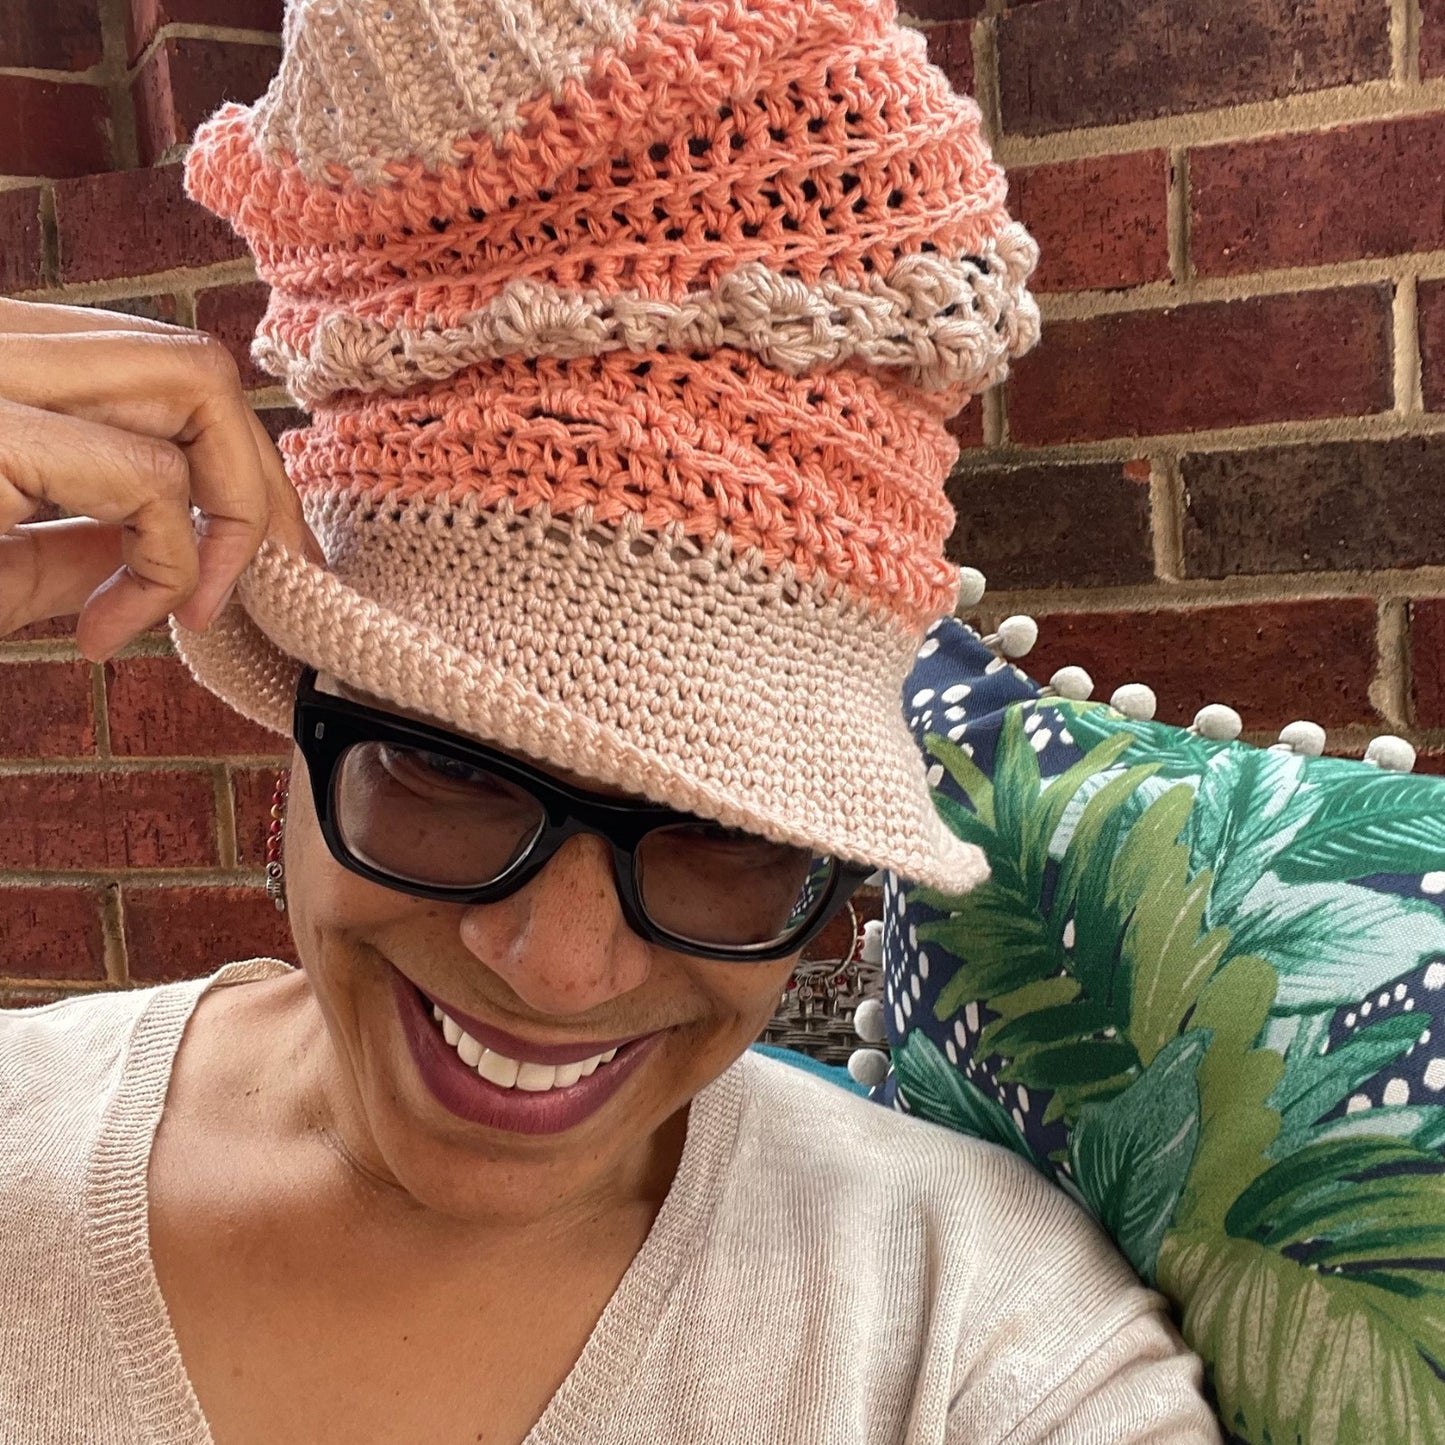 Yarn Gone Wild-Yarn Craft Crochet Hat From The All The Feel Spring Collection